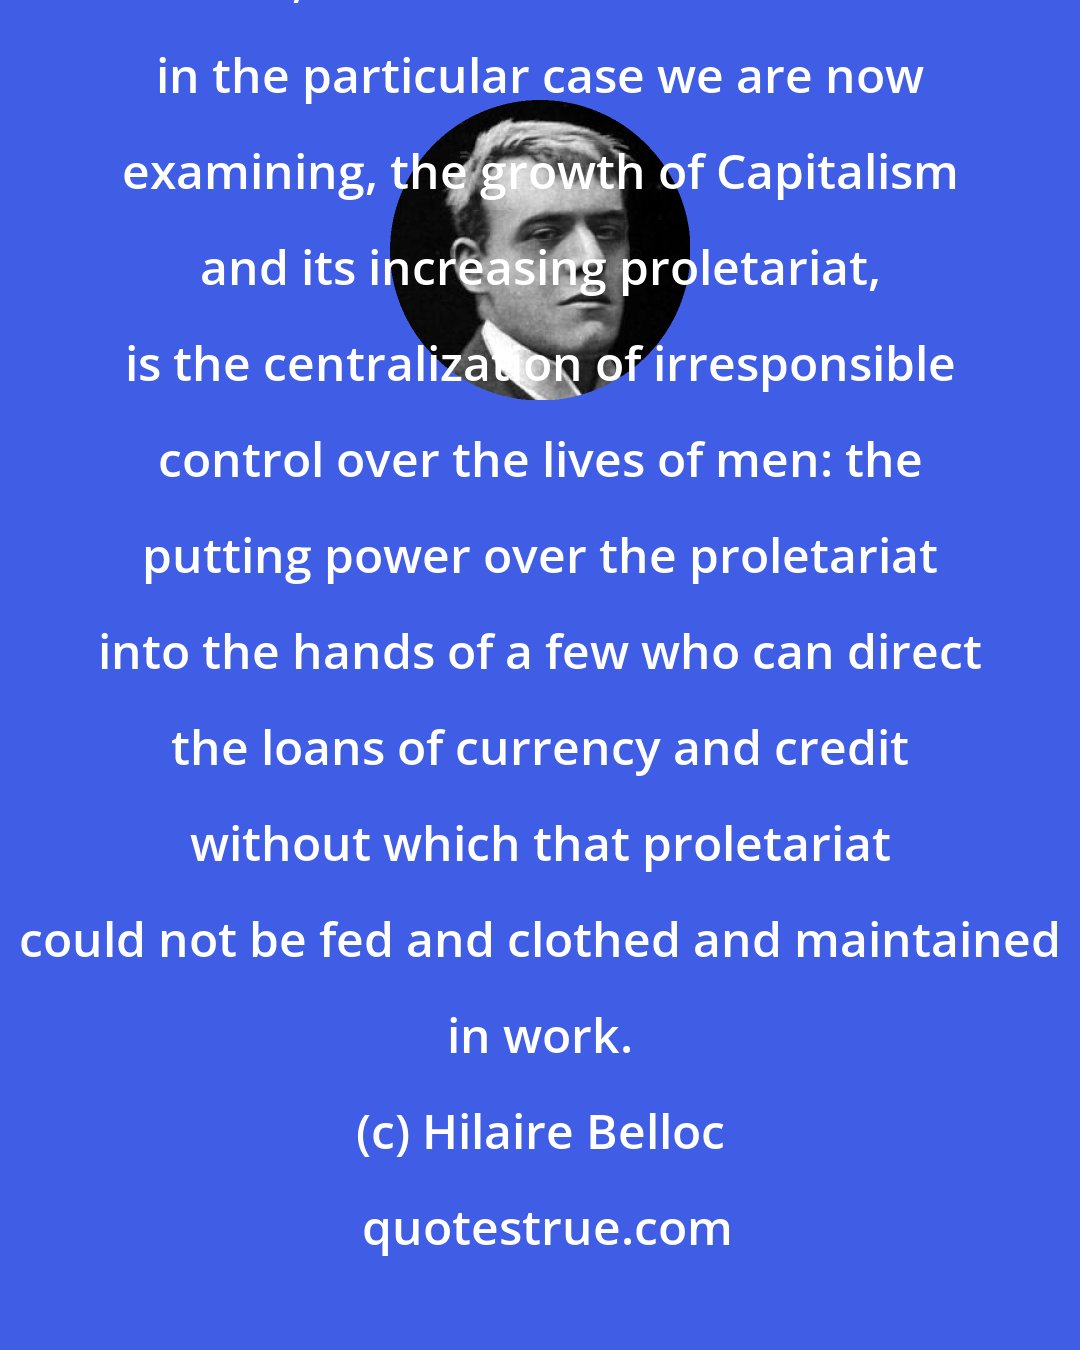 Hilaire Belloc: But though Usury is in itself immoral, and justly condemned by every ethical code, its chief and worst defect in the particular case we are now examining, the growth of Capitalism and its increasing proletariat, is the centralization of irresponsible control over the lives of men: the putting power over the proletariat into the hands of a few who can direct the loans of currency and credit without which that proletariat could not be fed and clothed and maintained in work.